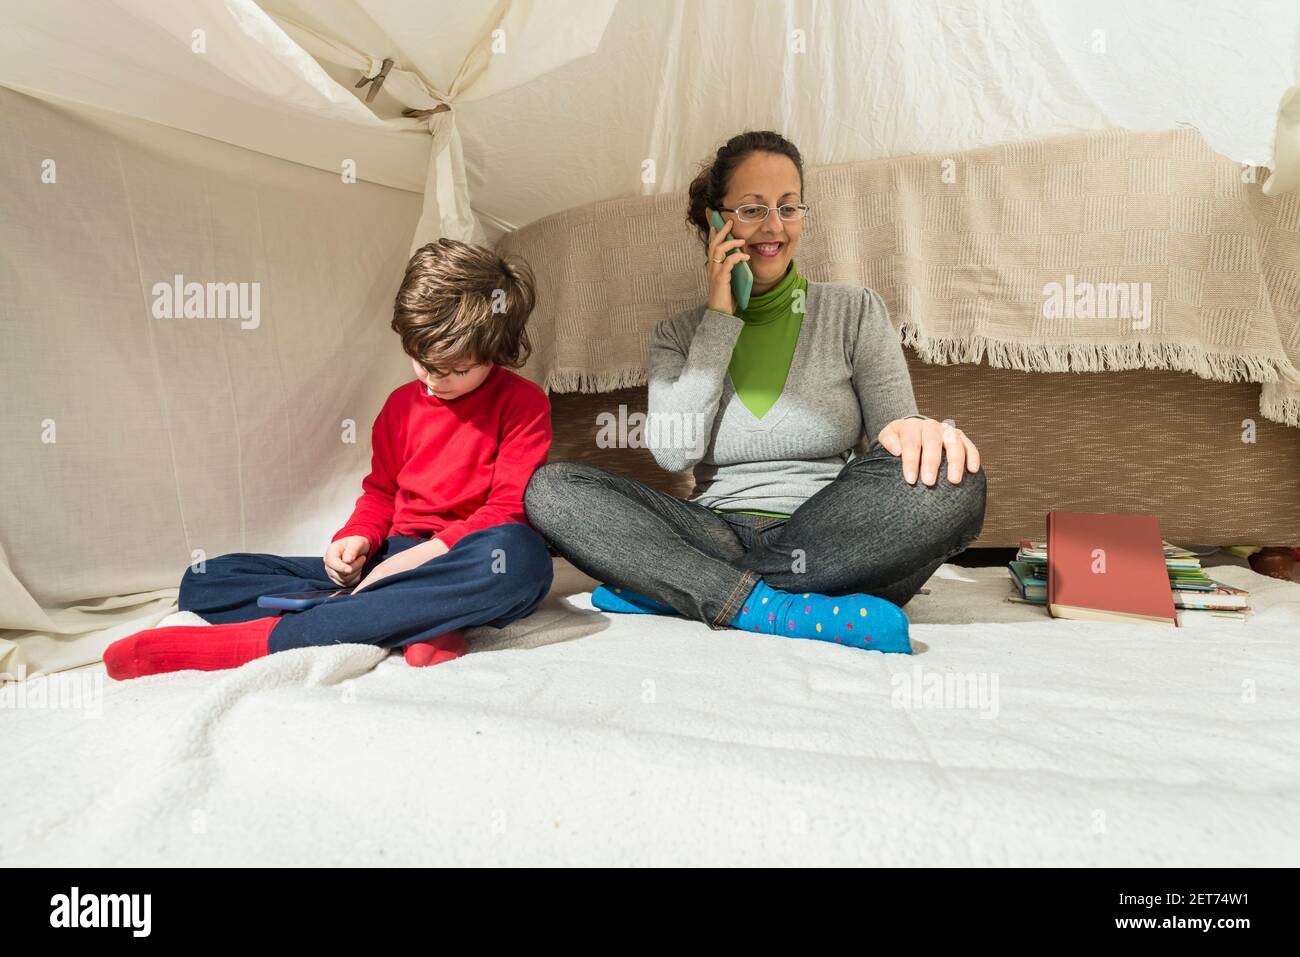 A woman talks on the phone and a child plays with a smartphone in a makeshift tent in their living room. Home lifestyle concept. Stock Photo